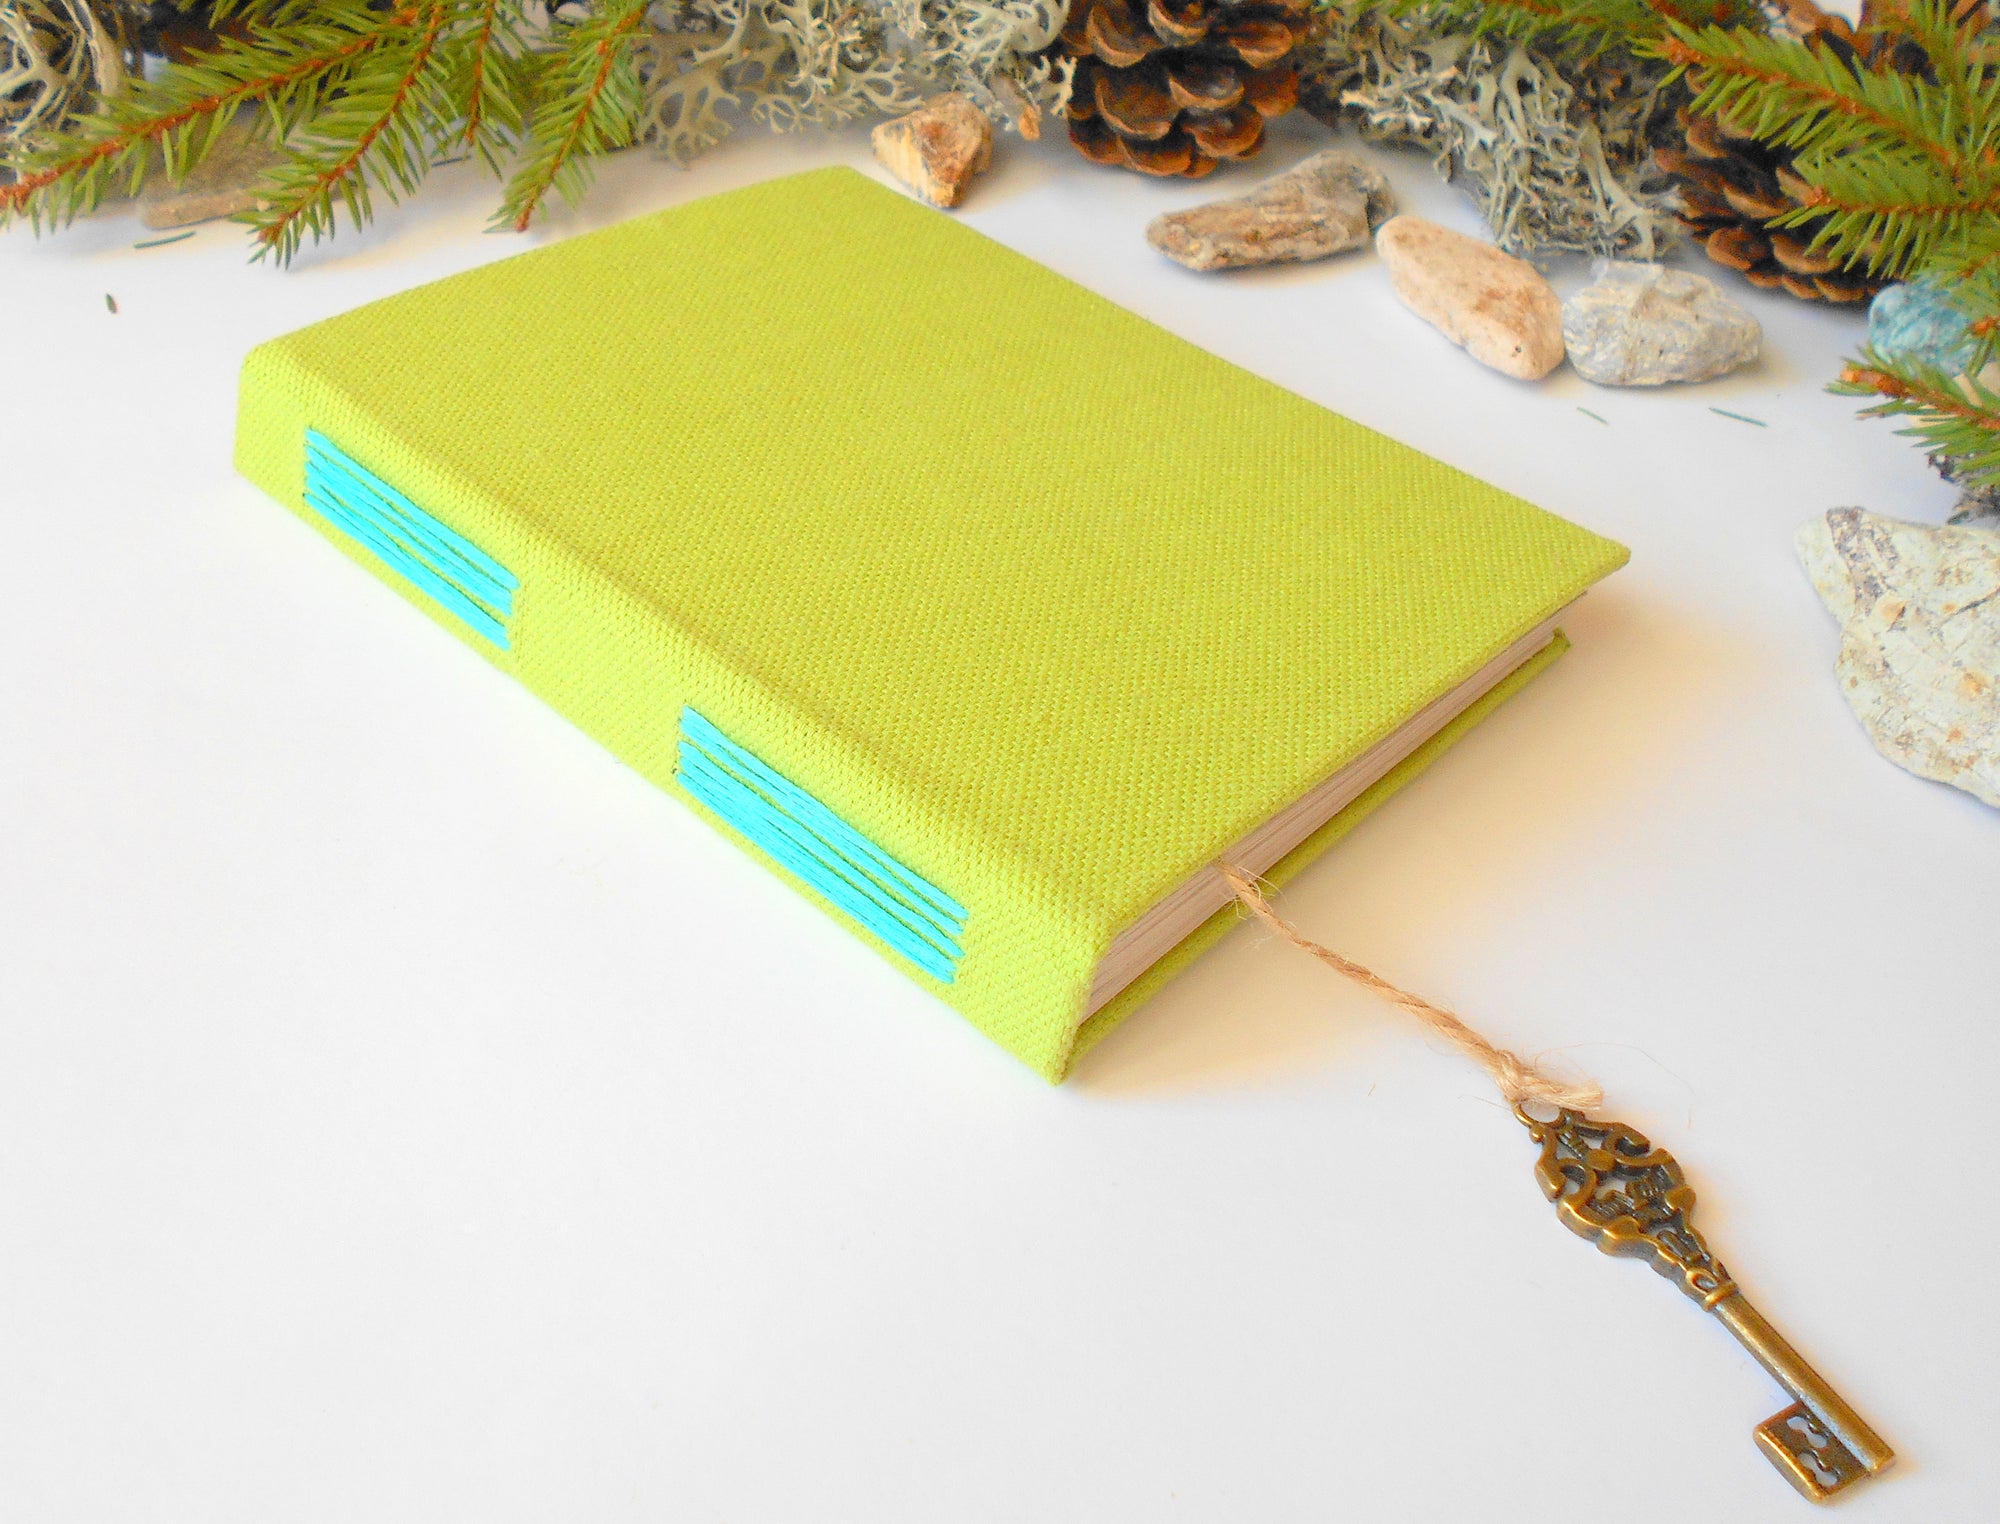 Handmade green linen fabric eco-friendly journal with hardcovers and 100% recycled pages with a bookmark accessory from a twine cord and a vintage key on the end.